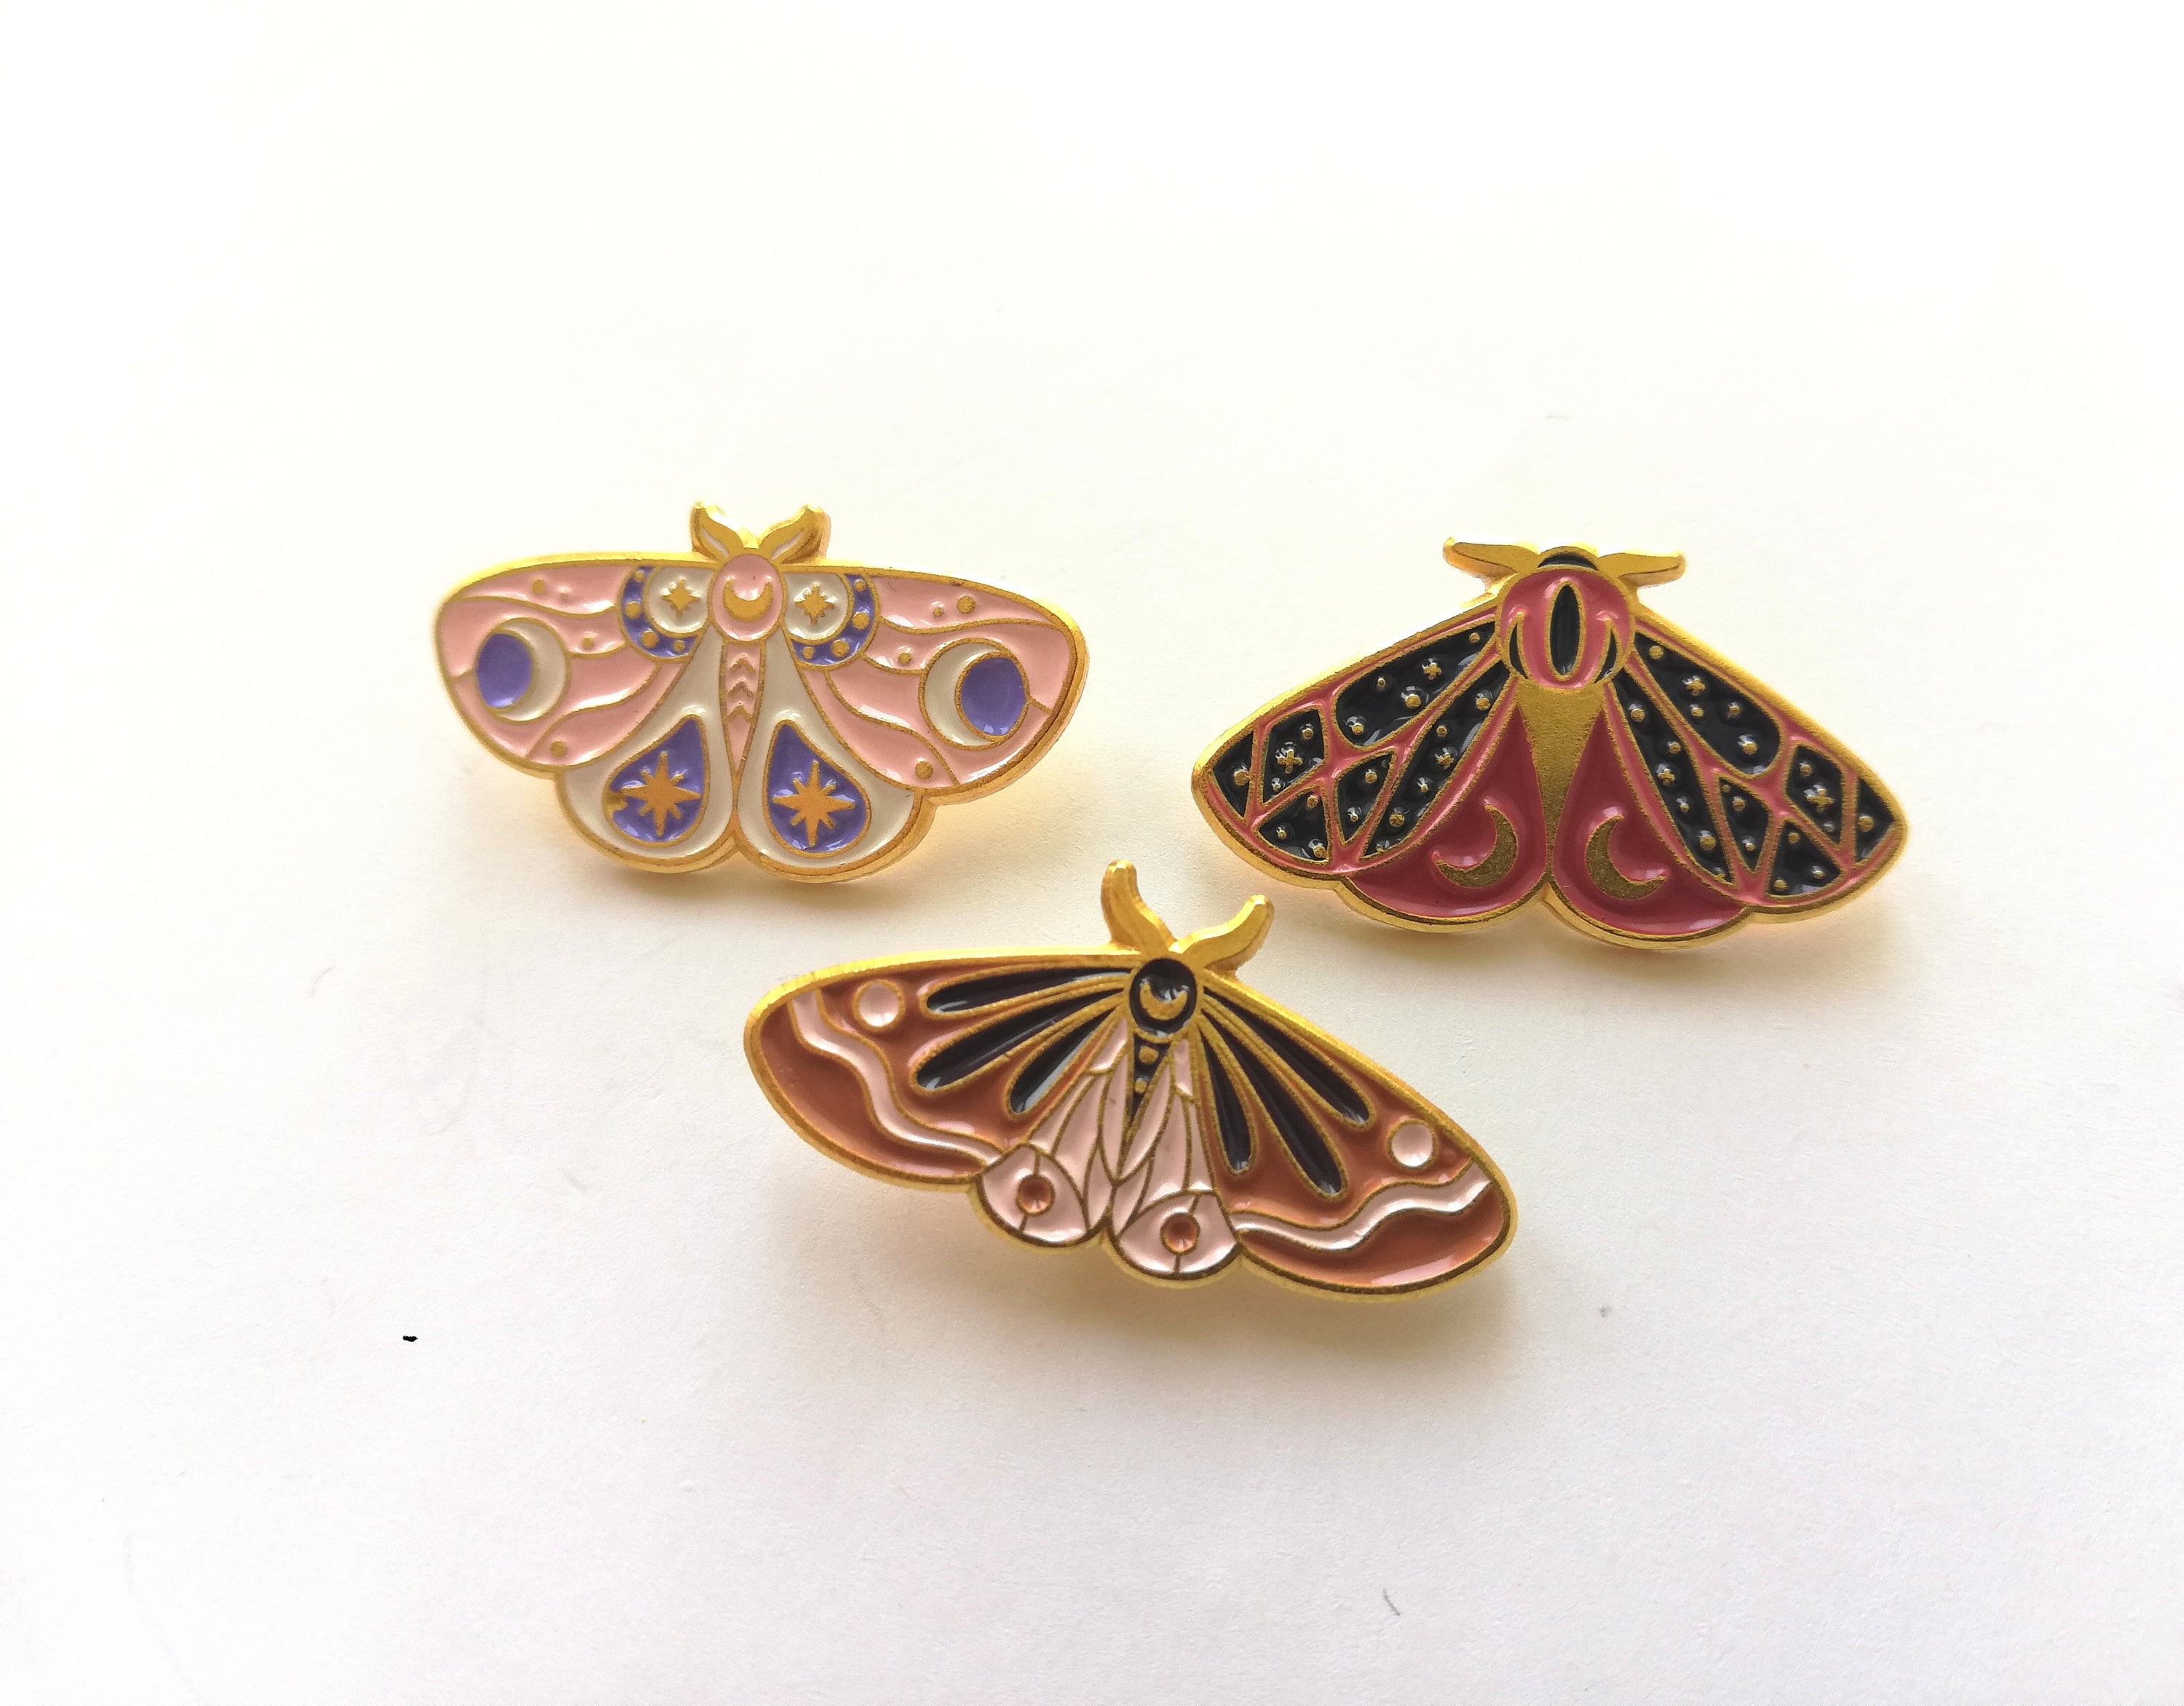 Mysterious Moth Moon Lunar Eclipse Butterfly Feministic Symbol Enamel Pin Badge